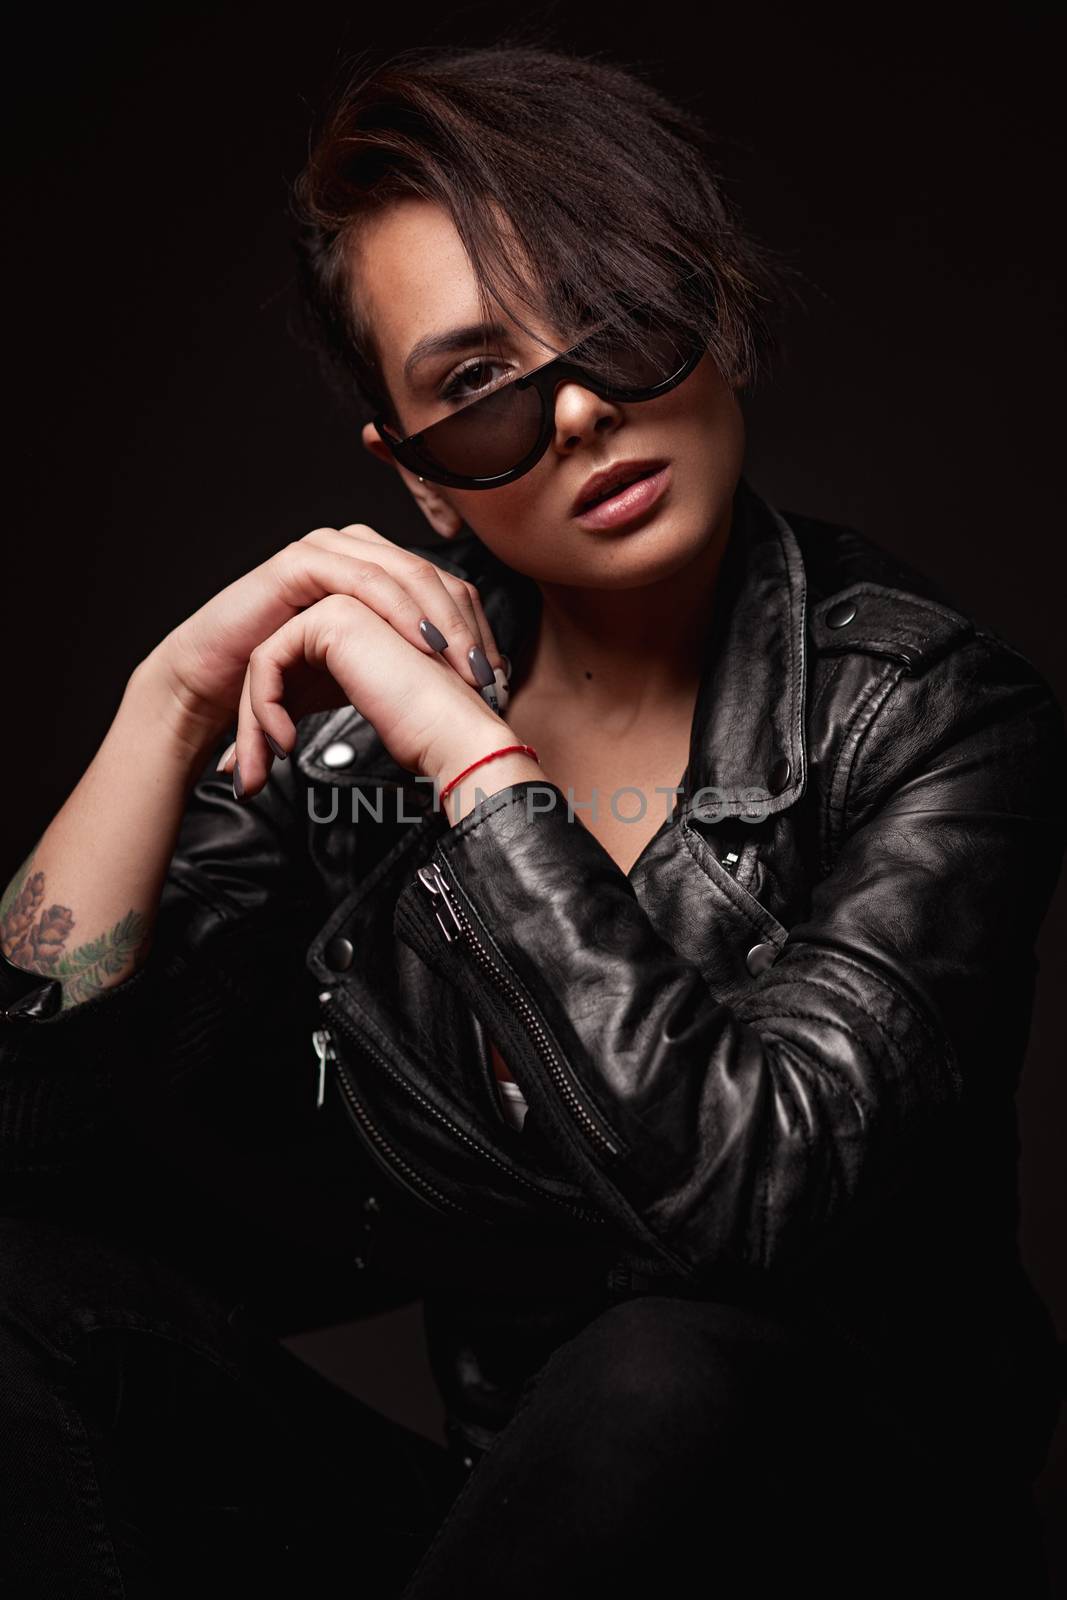 Beauty sexy woman in a leather jacket. Portrait on a dark background